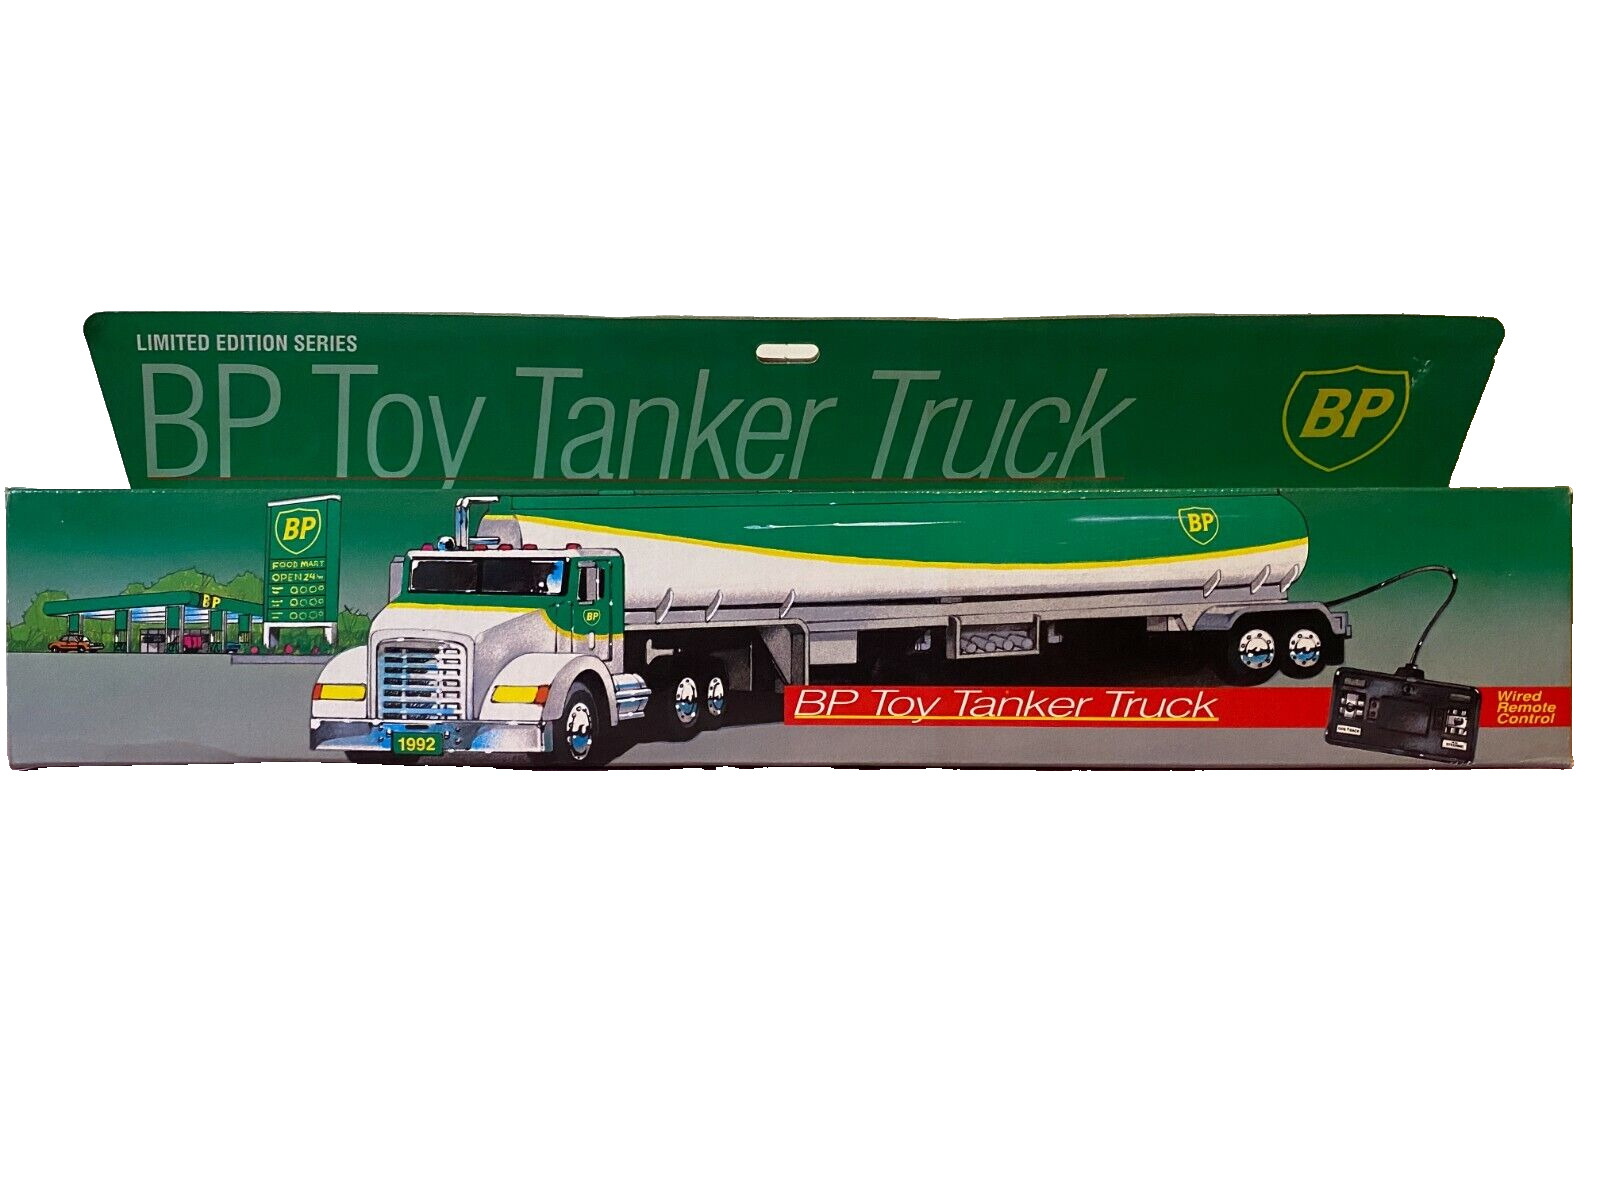 1992 BP Wired Remote Control Toy Tanker Truck. Limited Edition-New.